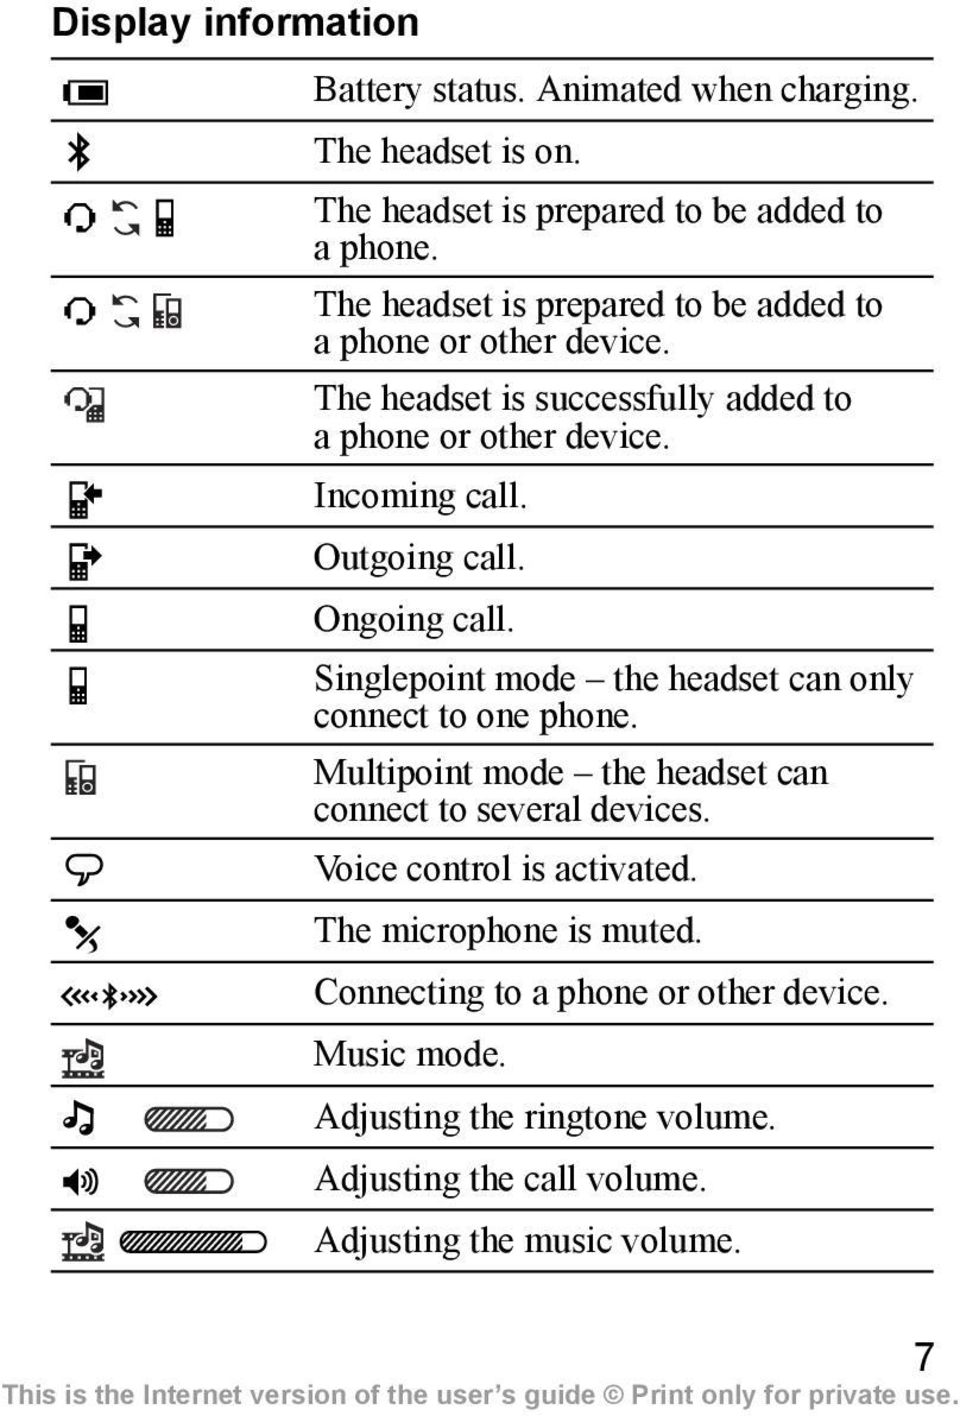 Outgoing call. Ongoing call. Singlepoint mode the headset can only connect to one phone. Multipoint mode the headset can connect to several devices.